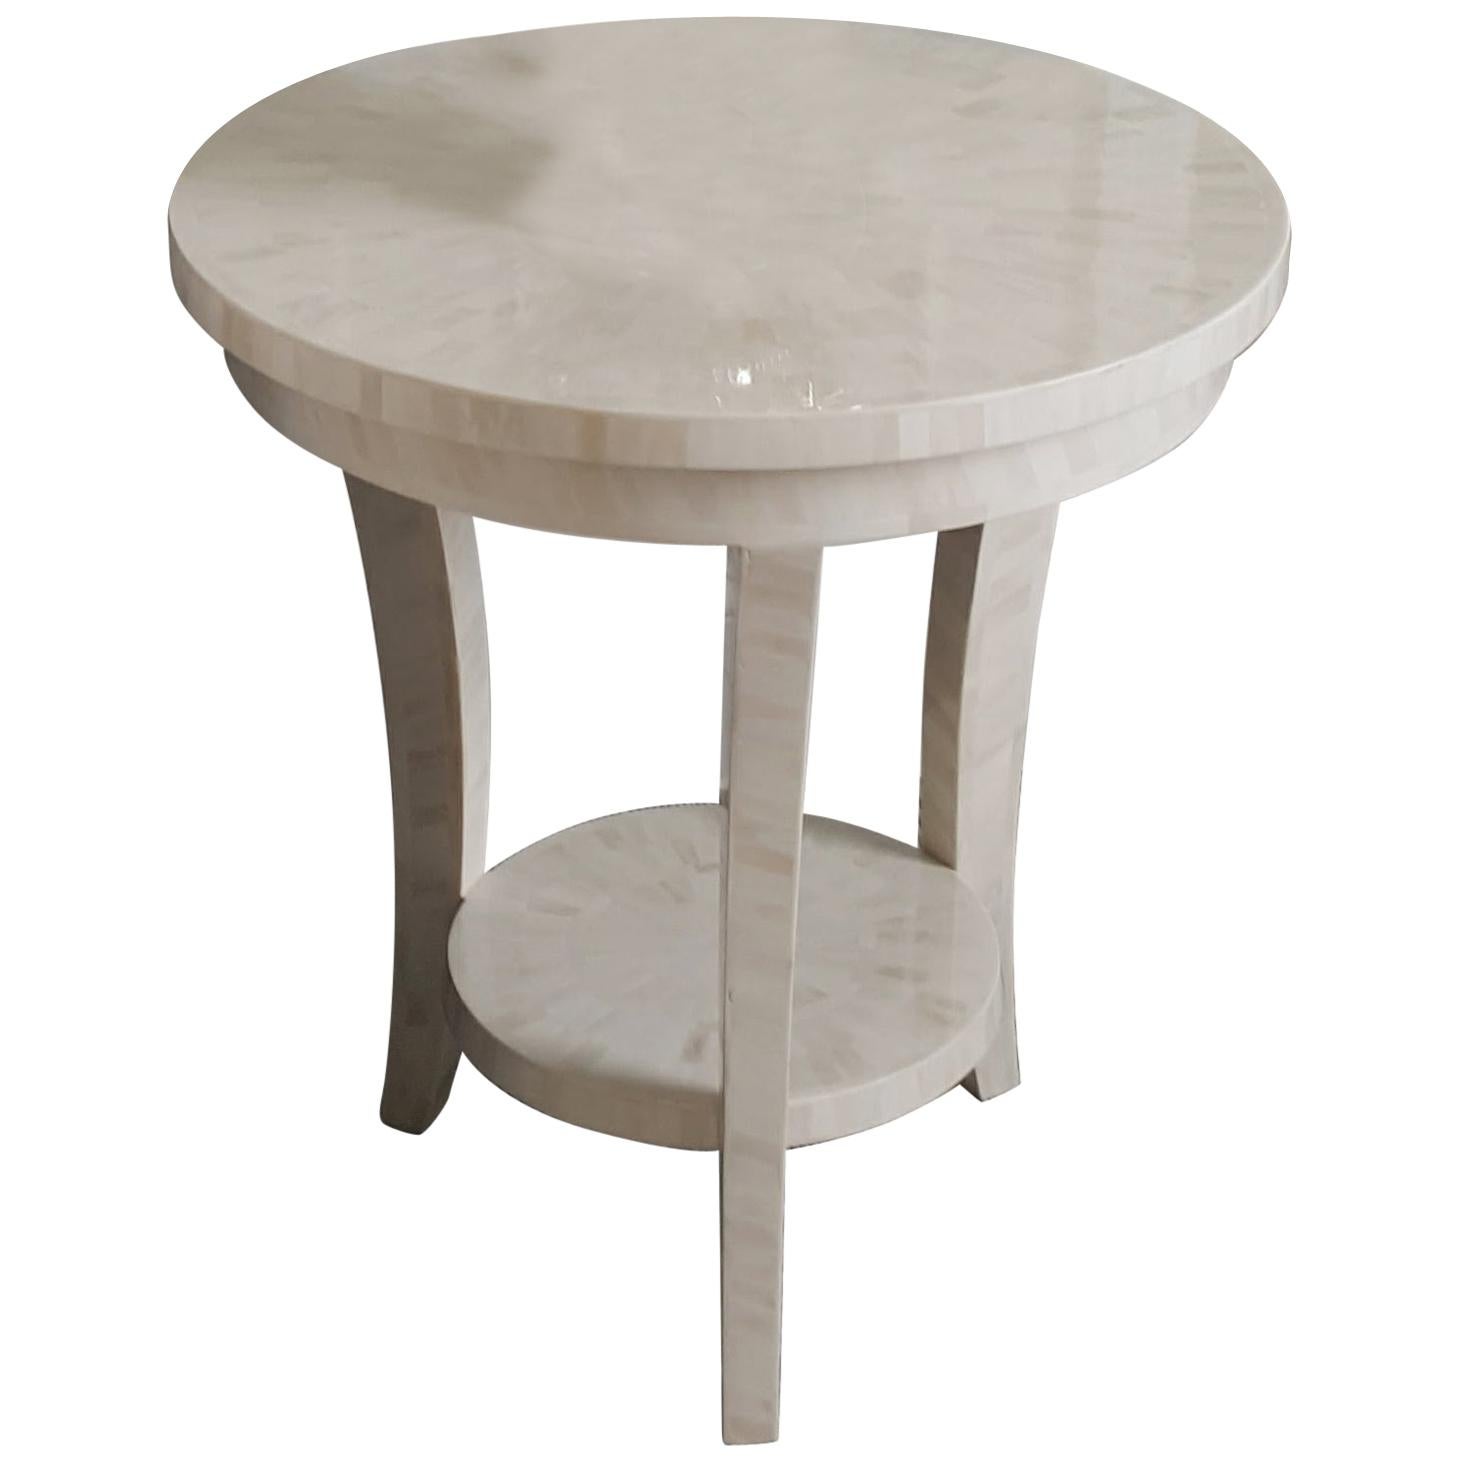 Karakum Two-Tiered Table in Bone with Shelf For Sale